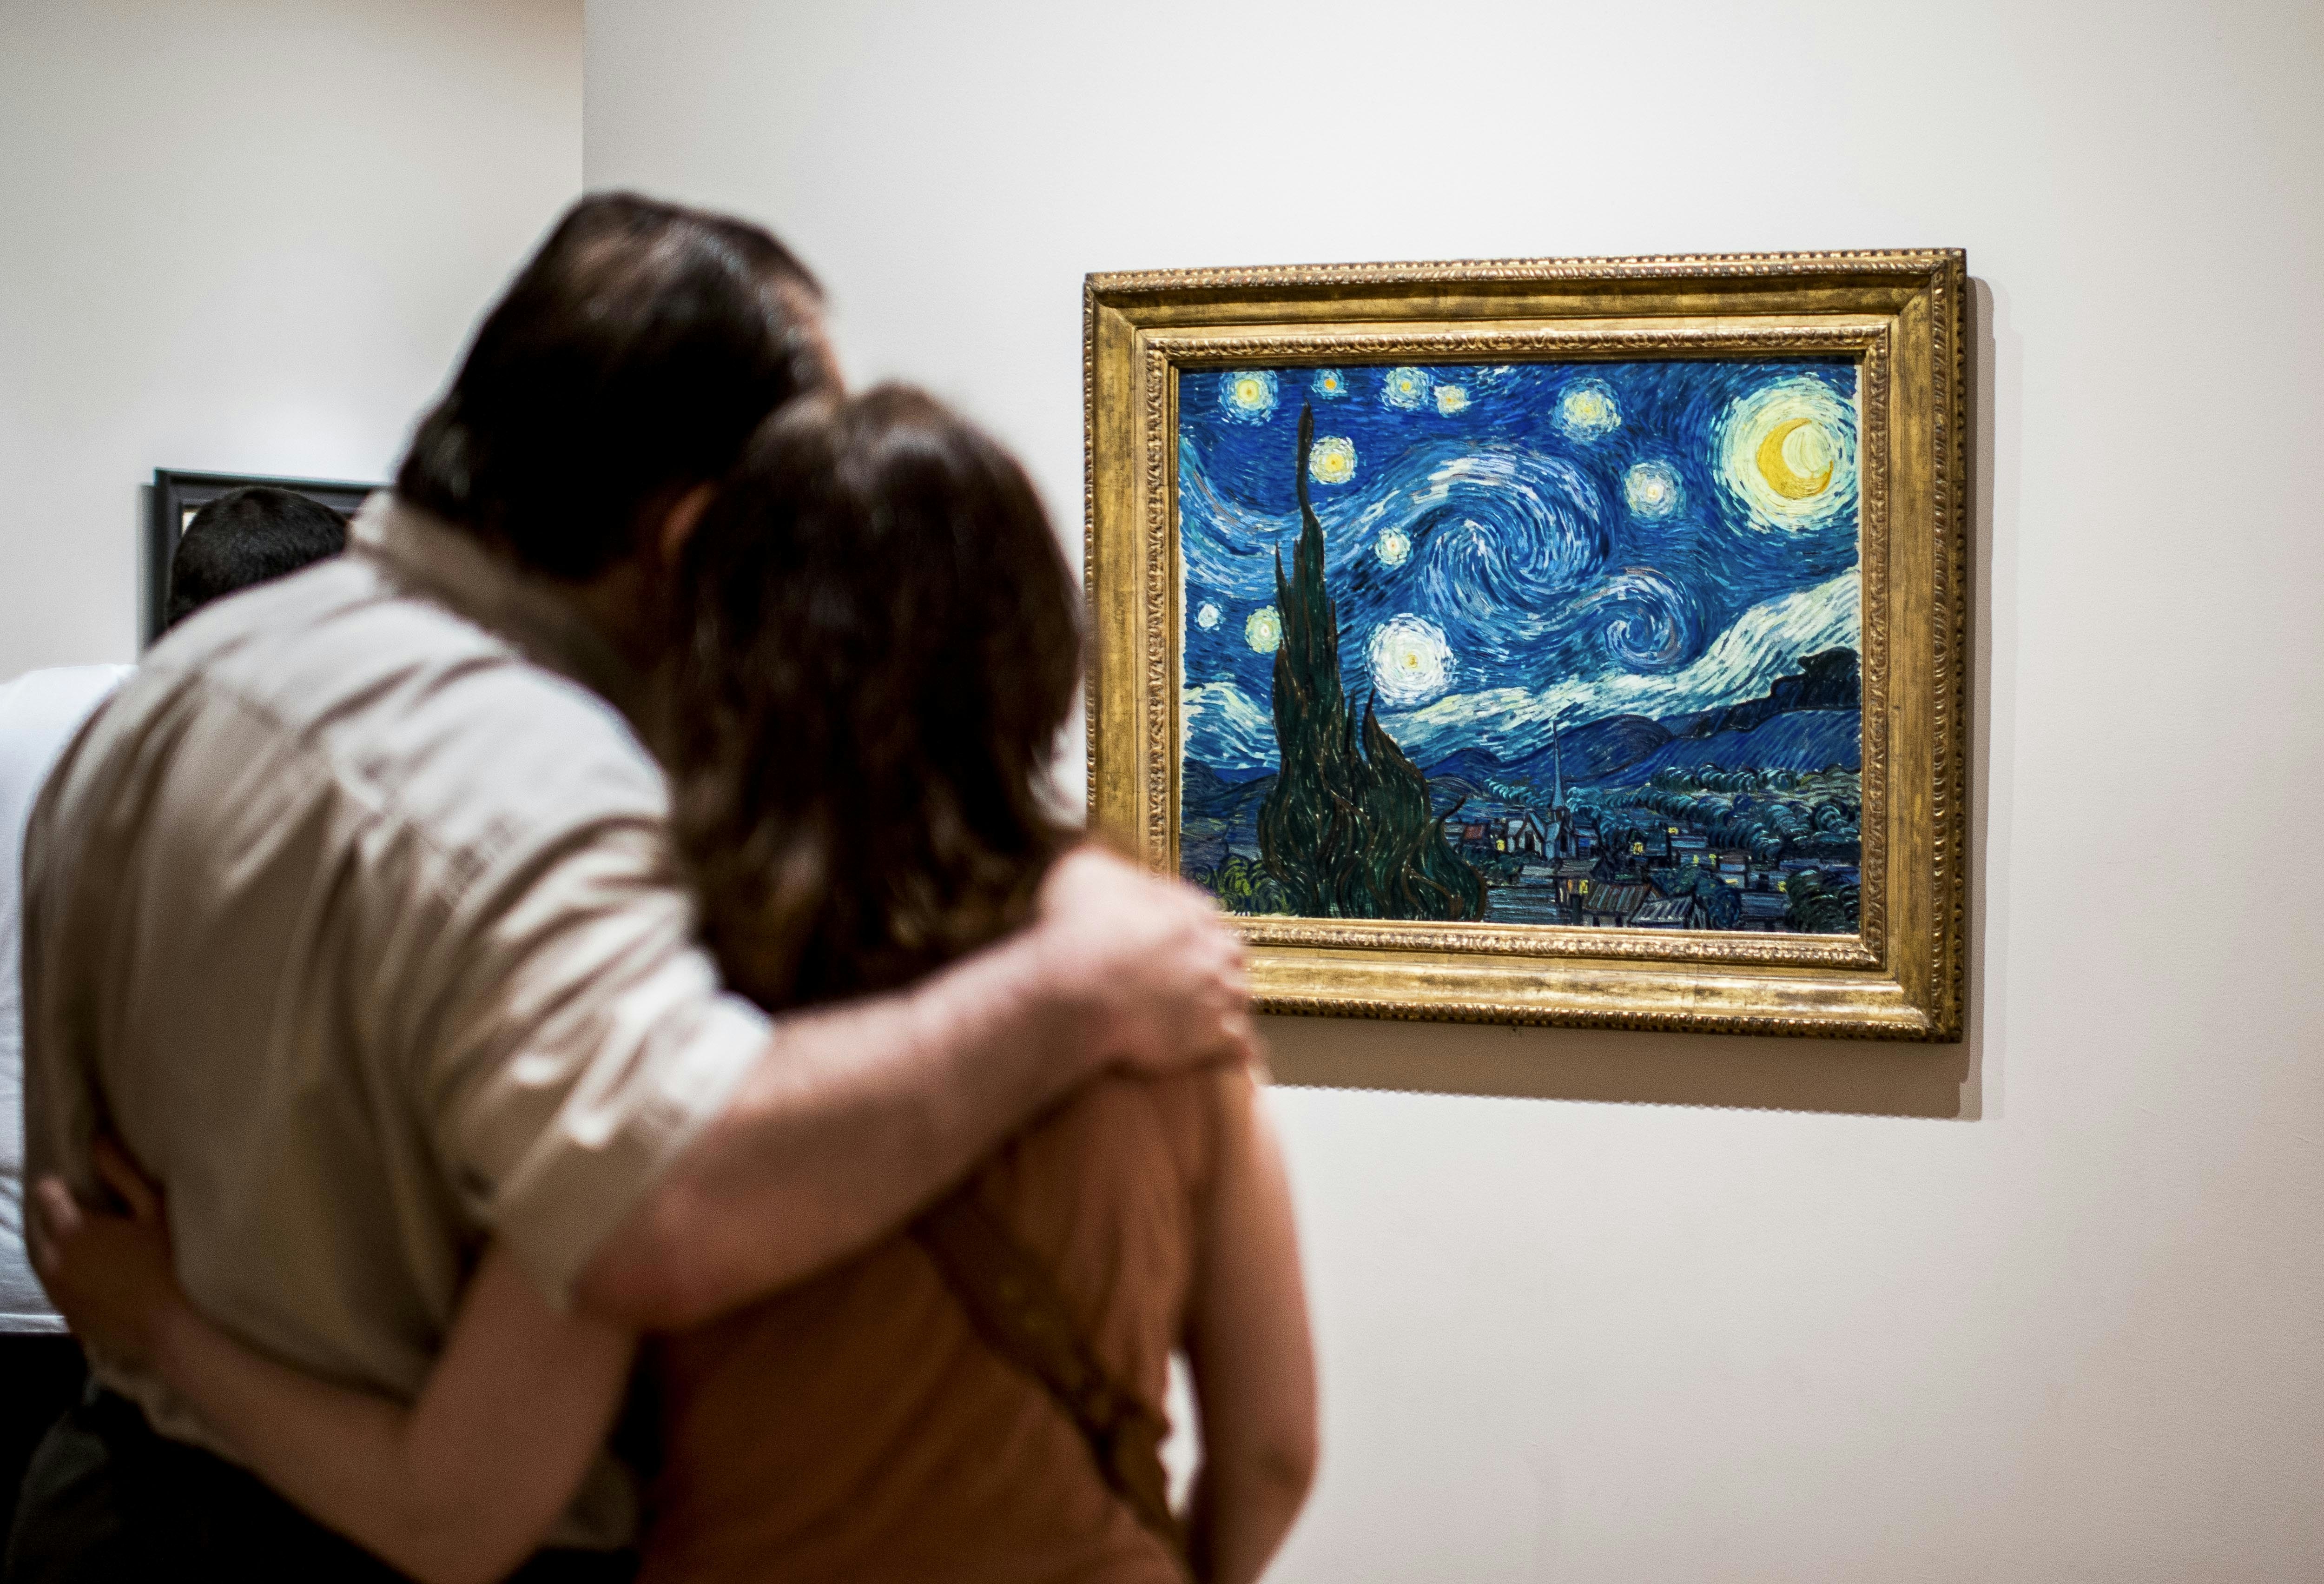 Two tourists, one with their arm around the other, look at The Starry Night by painter Van Gogh at Museum of Modern Art (MoMA), New York.